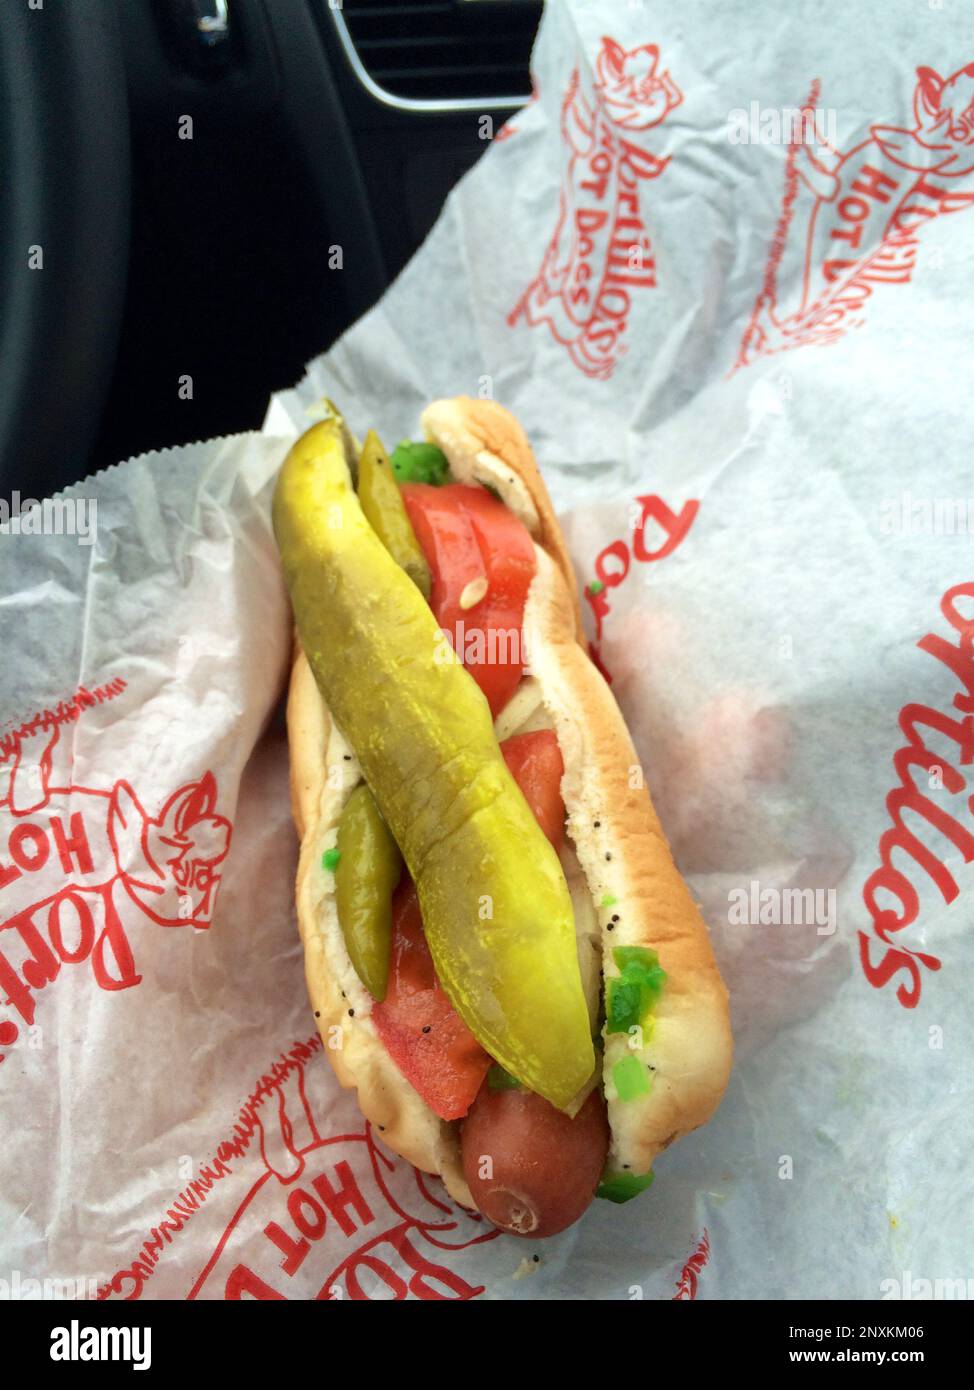 CHICAGO, ILLINOIS, UNITED STATES - Dec 13, 2015: Delicious Chicago Style Hot Dog with Pickle Stock Photo